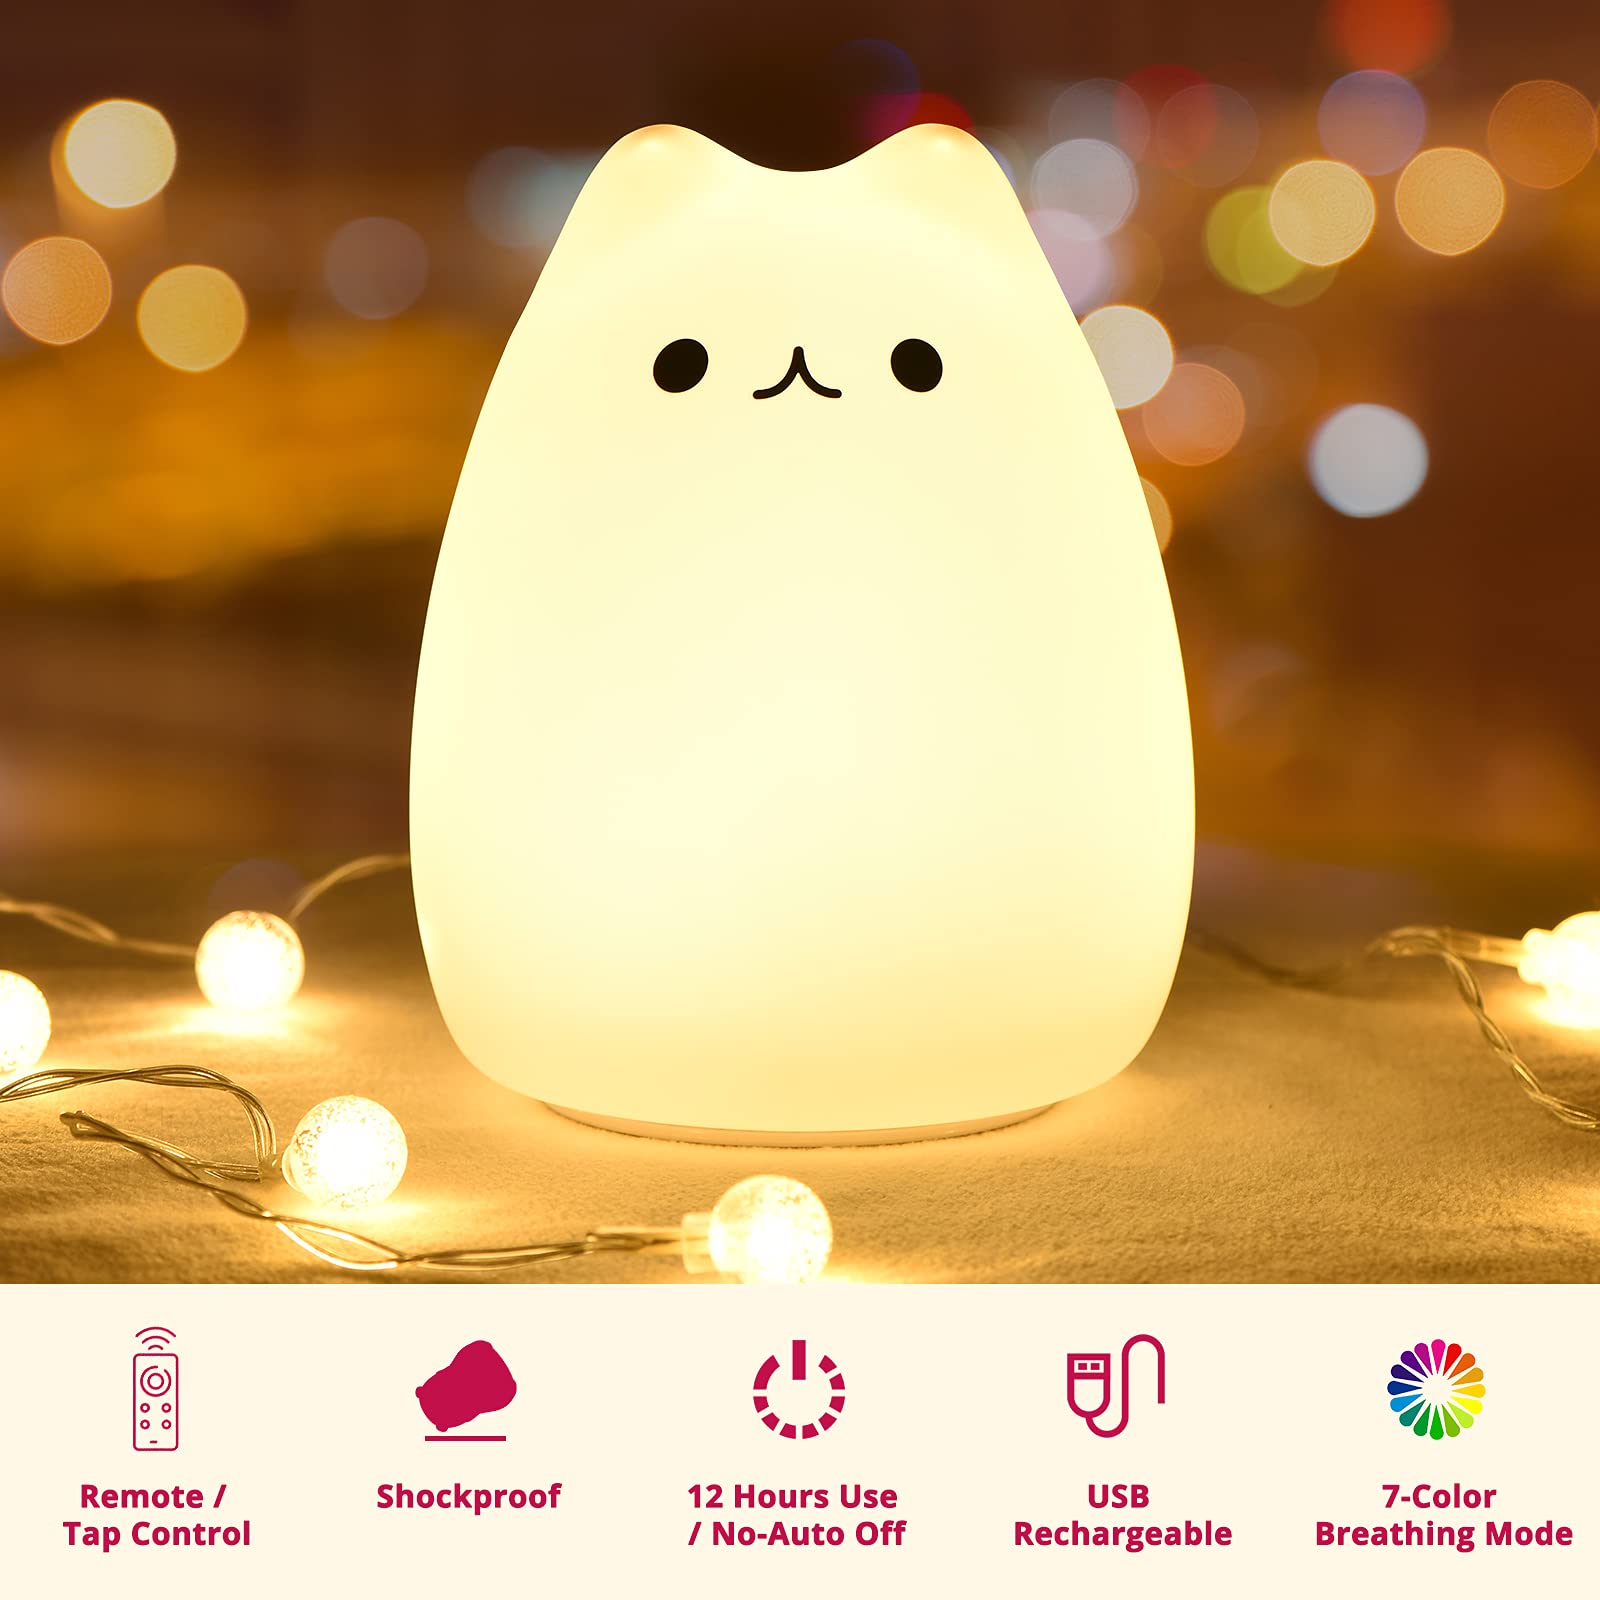 GoLine Cat Lamp, Gifts for 3 4 5 Year Old Girls,Graduation Gifts for Teen Girls,Kids Night Light for Bedroom,Kawaii Kitty Baby Nursery Lamp with Remote Control.